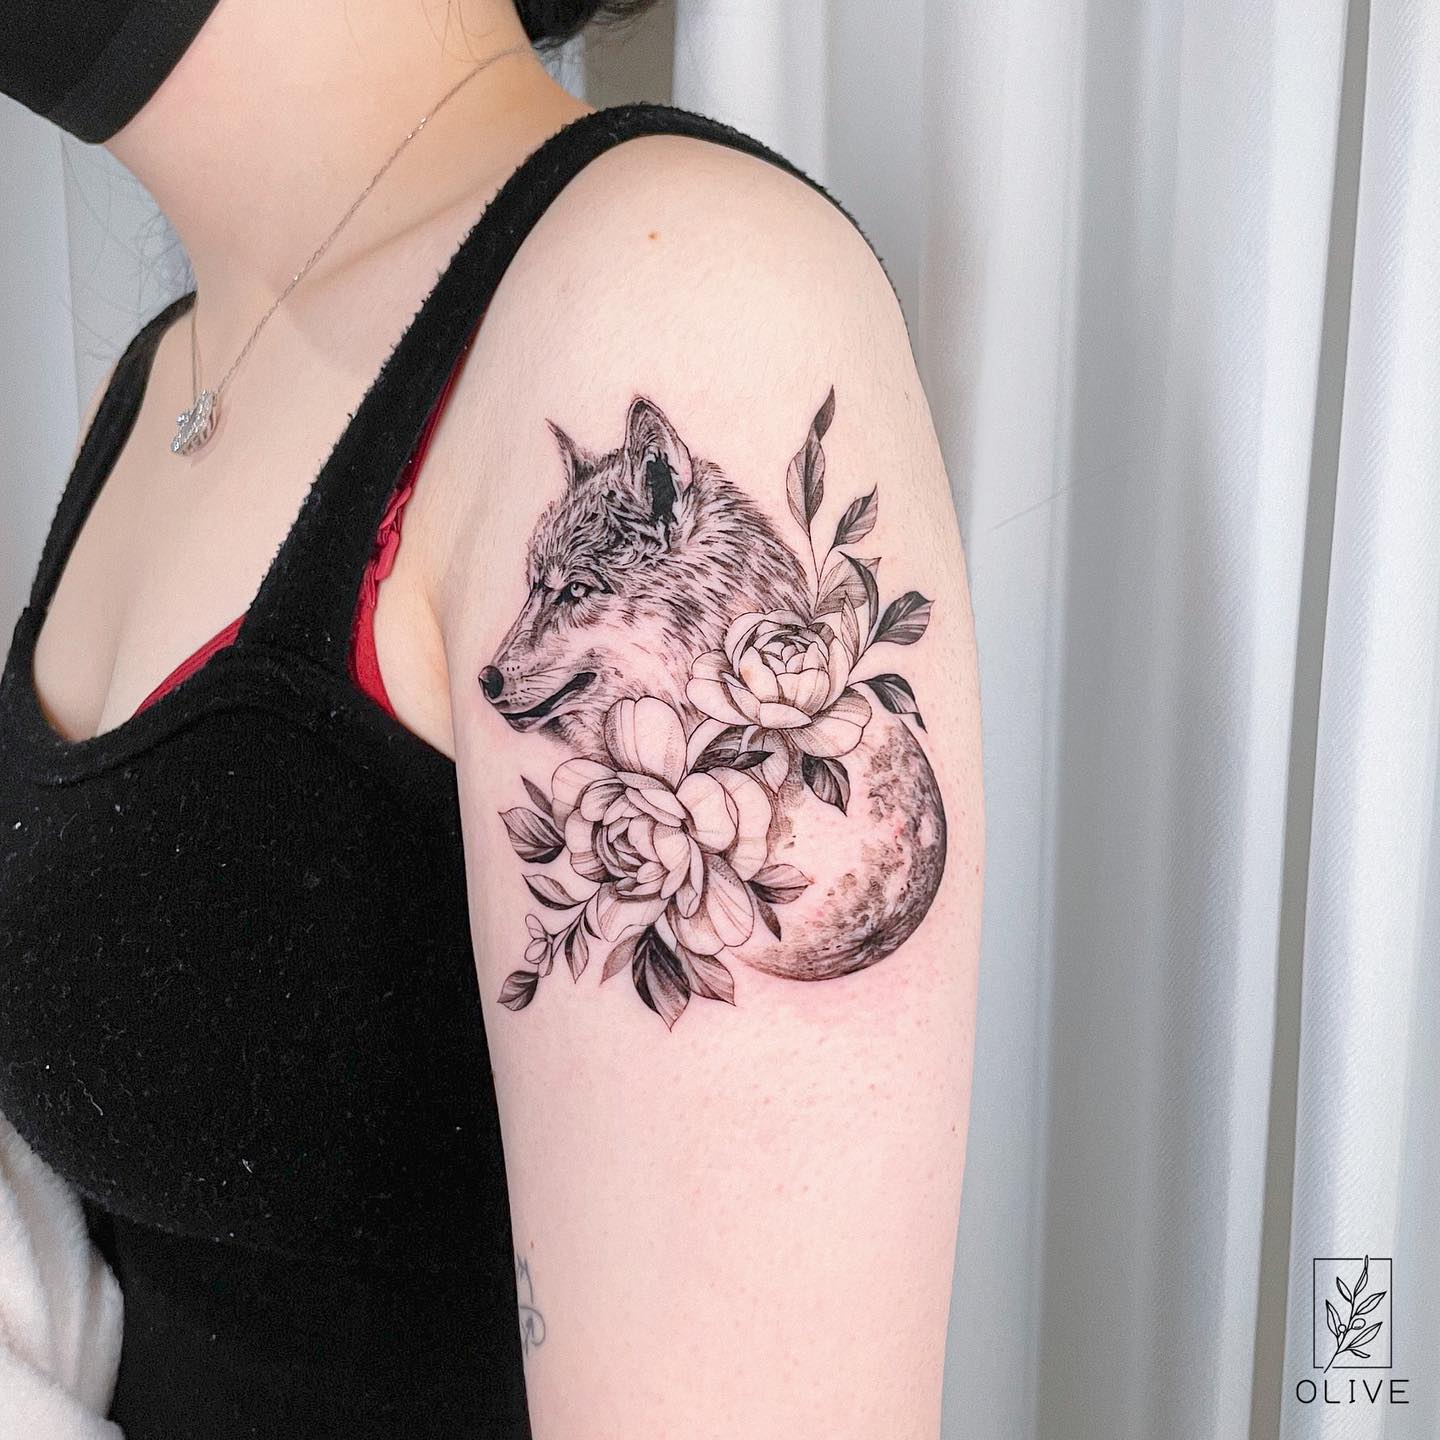 This shoulder tattoo is for women who like elegance and want something done with precision.